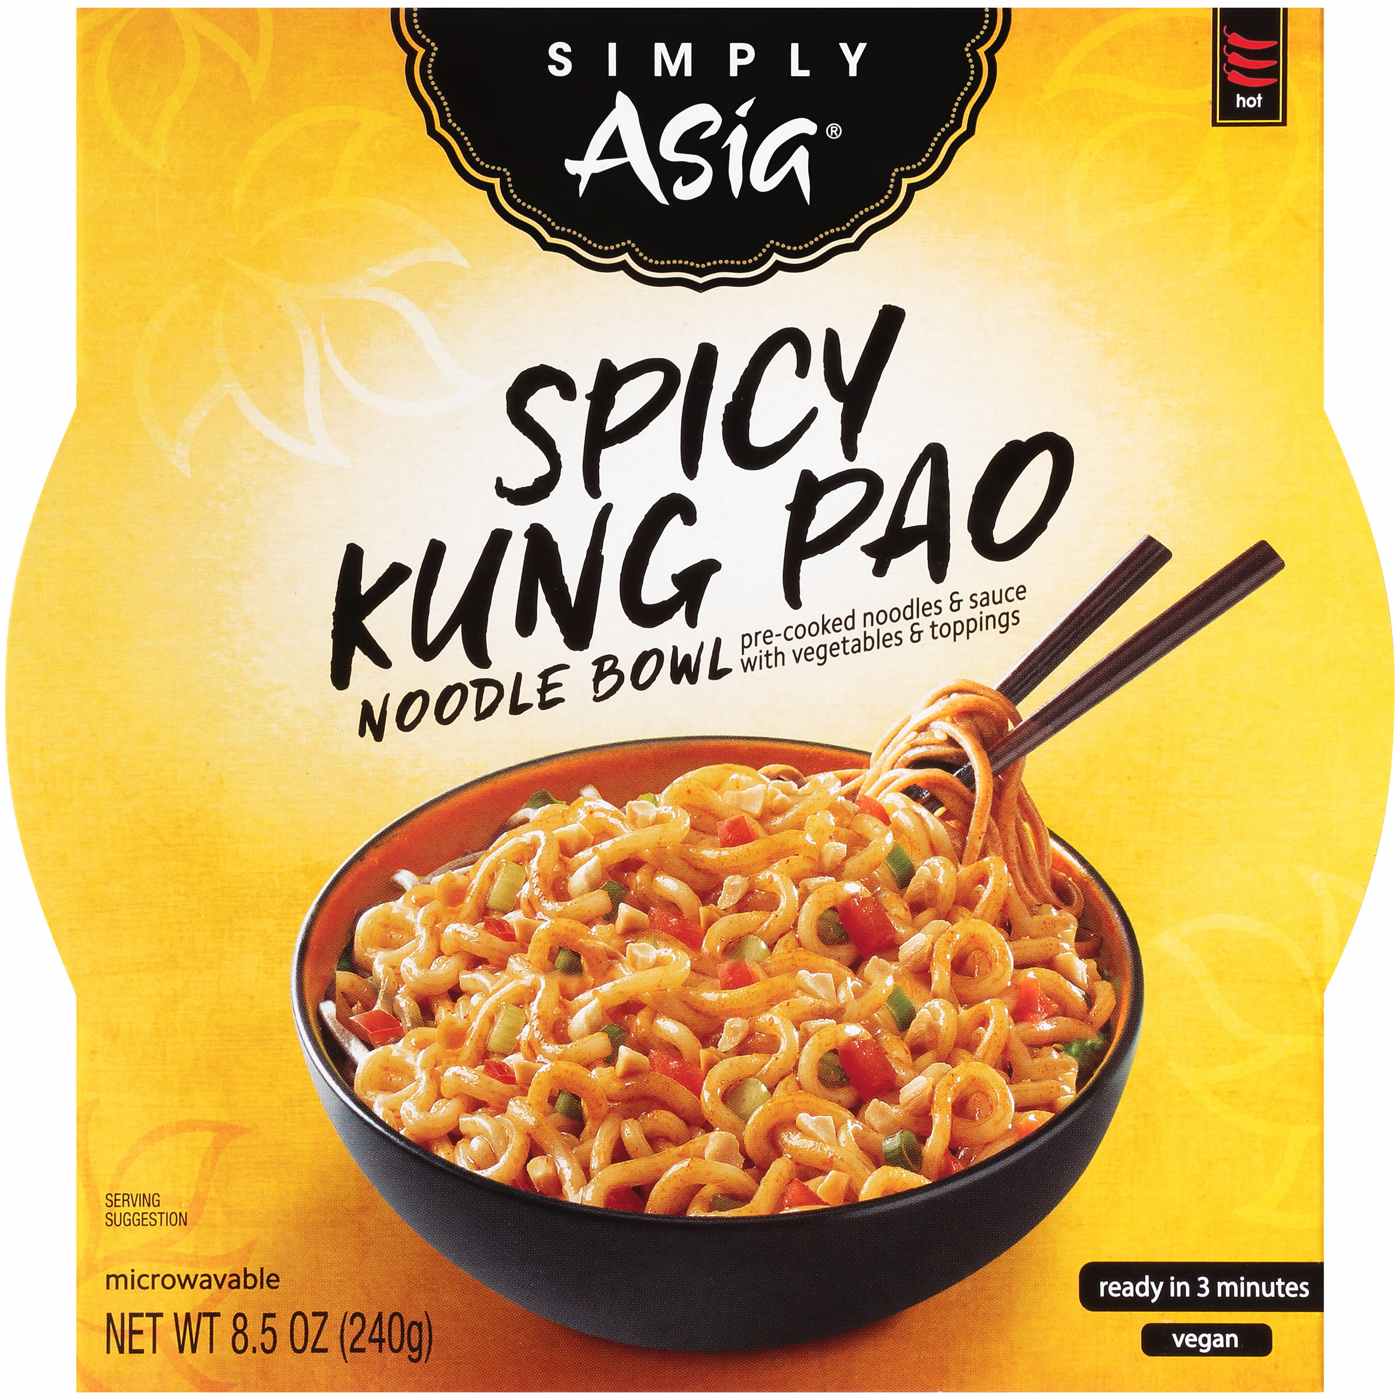 Simply Asia Spicy Kung Pao Noodle Bowl; image 1 of 7